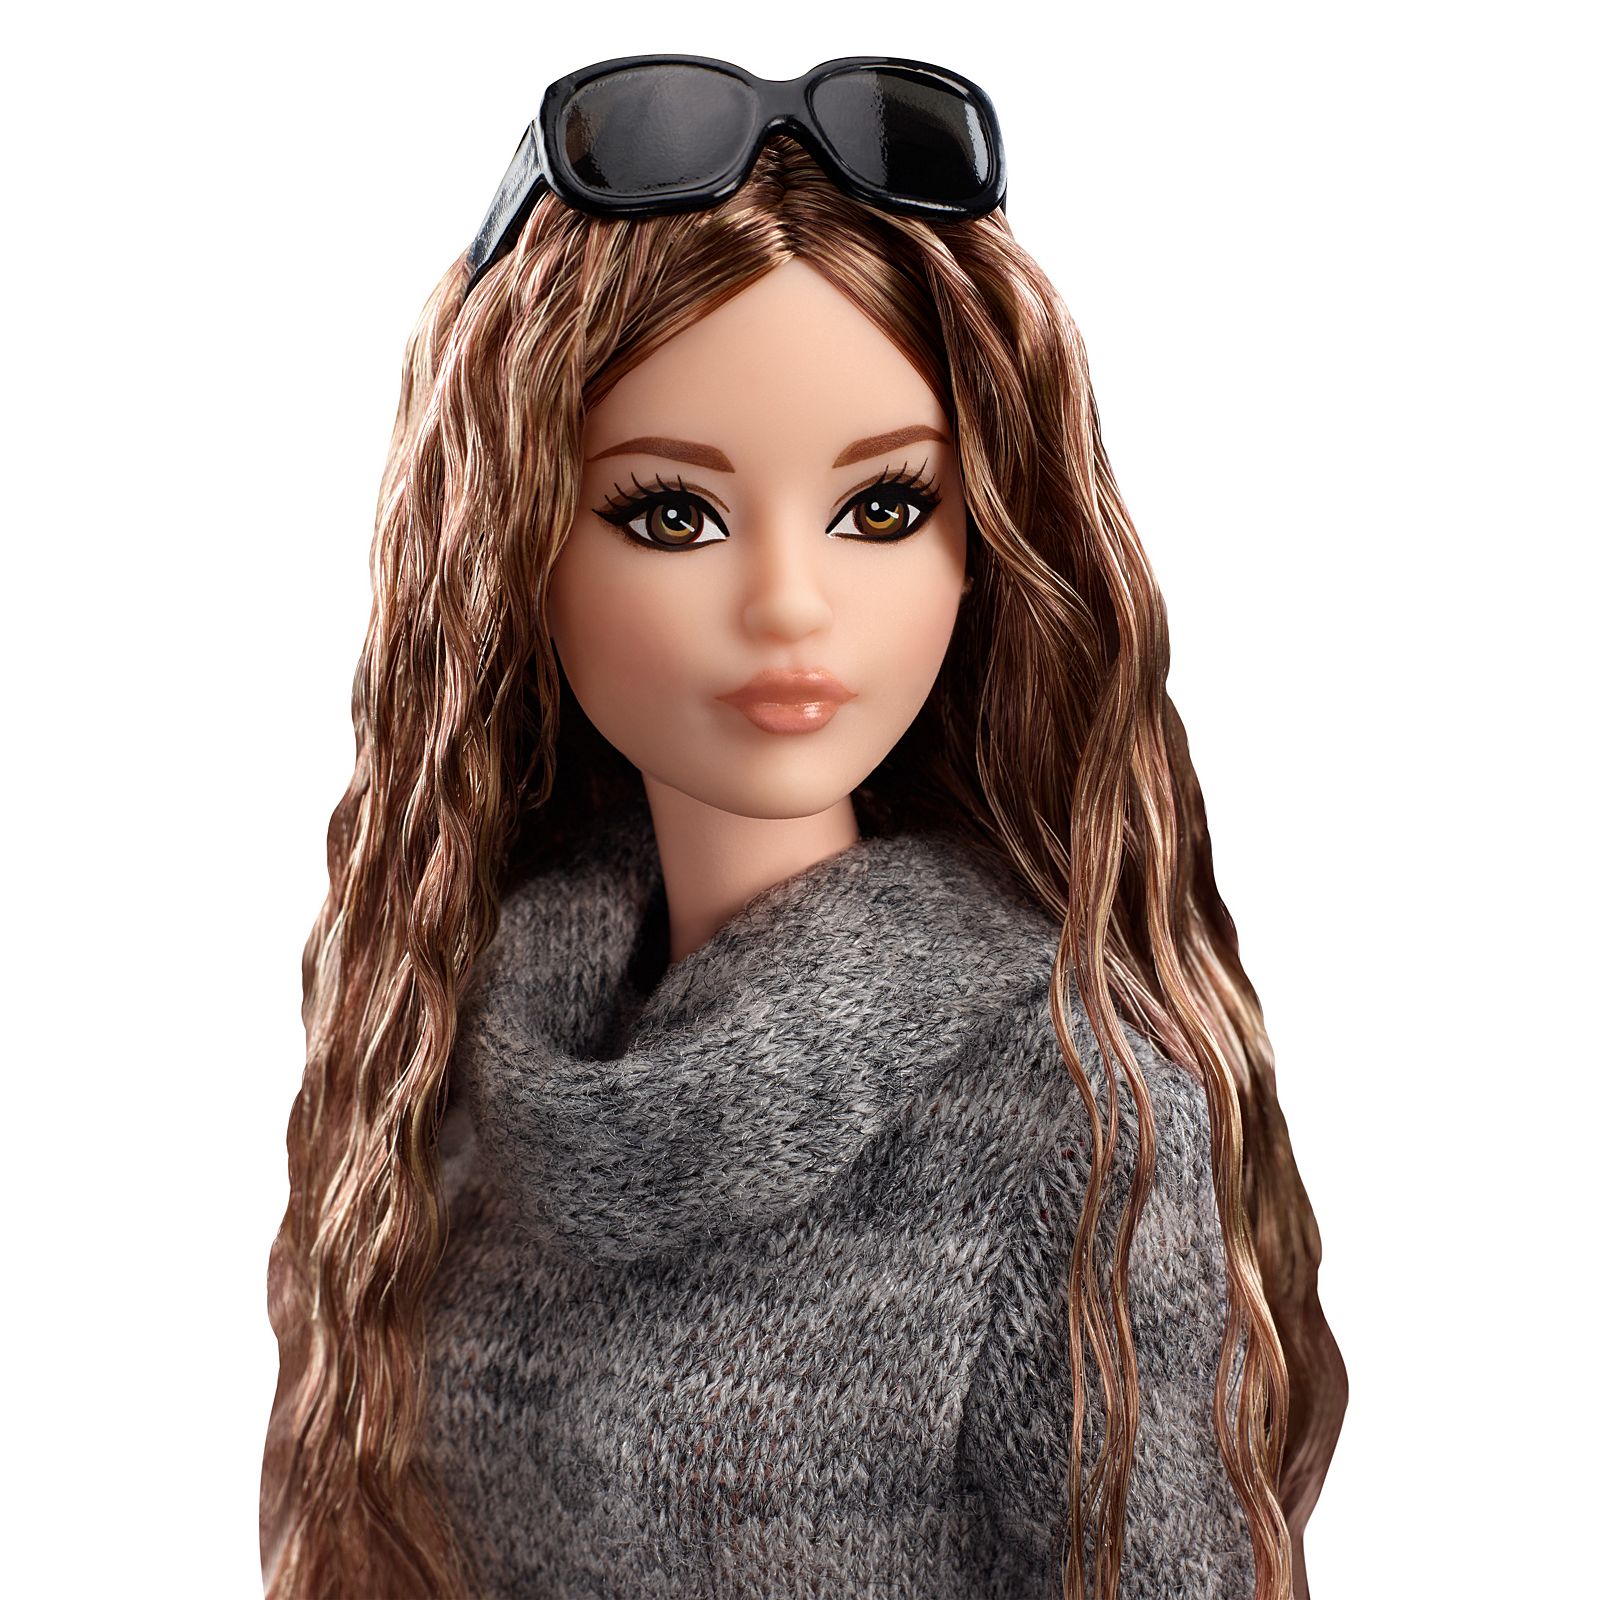 The Barbie Look Barbie Doll – City Chic Style - Perfectory Barbie Edition